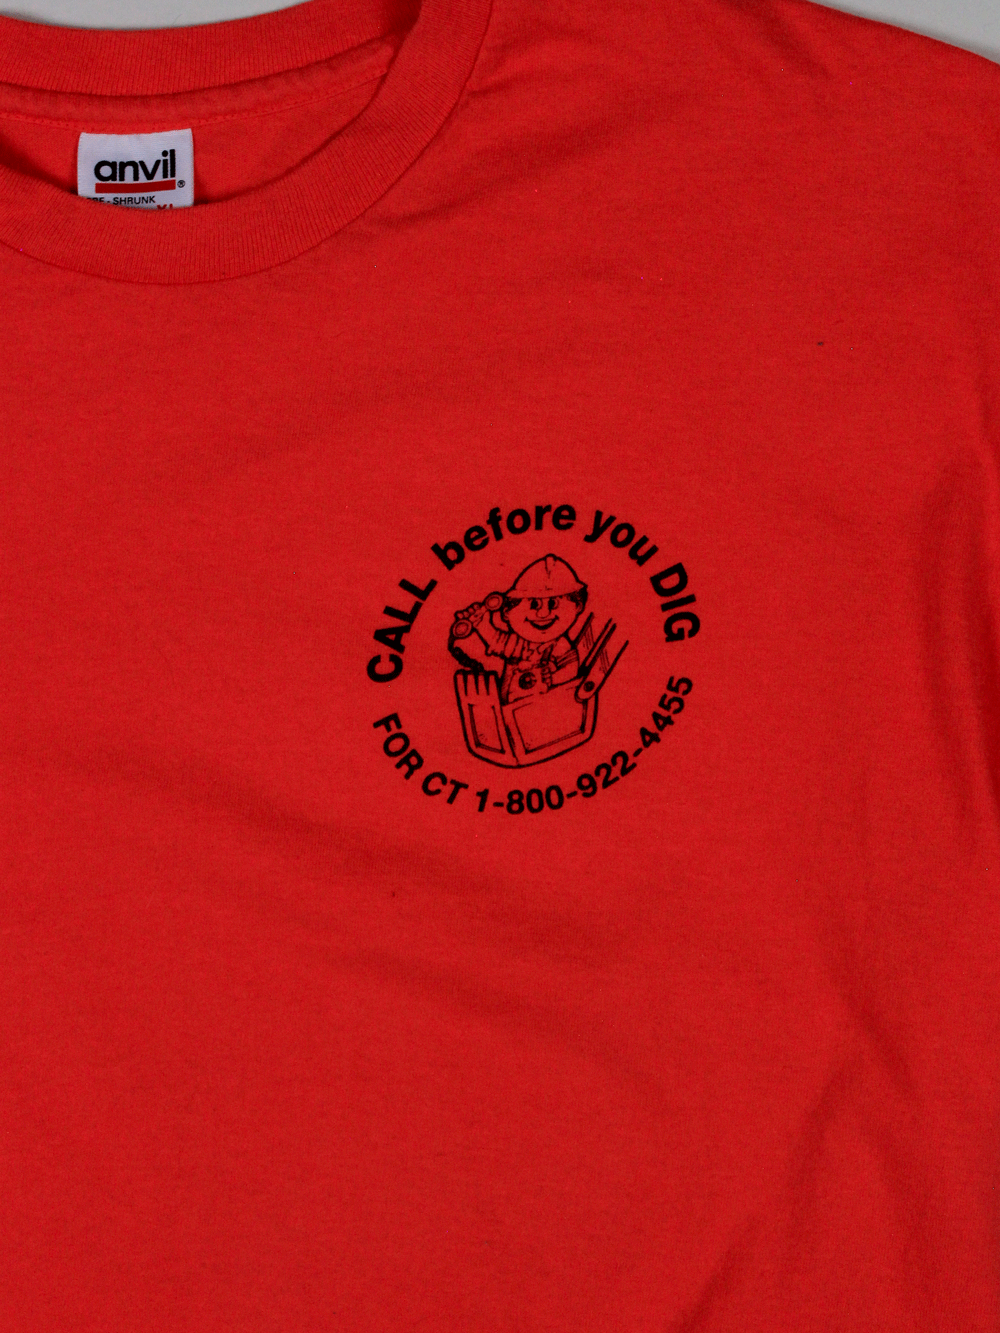 CALL before you DIG Vintage T-shirt